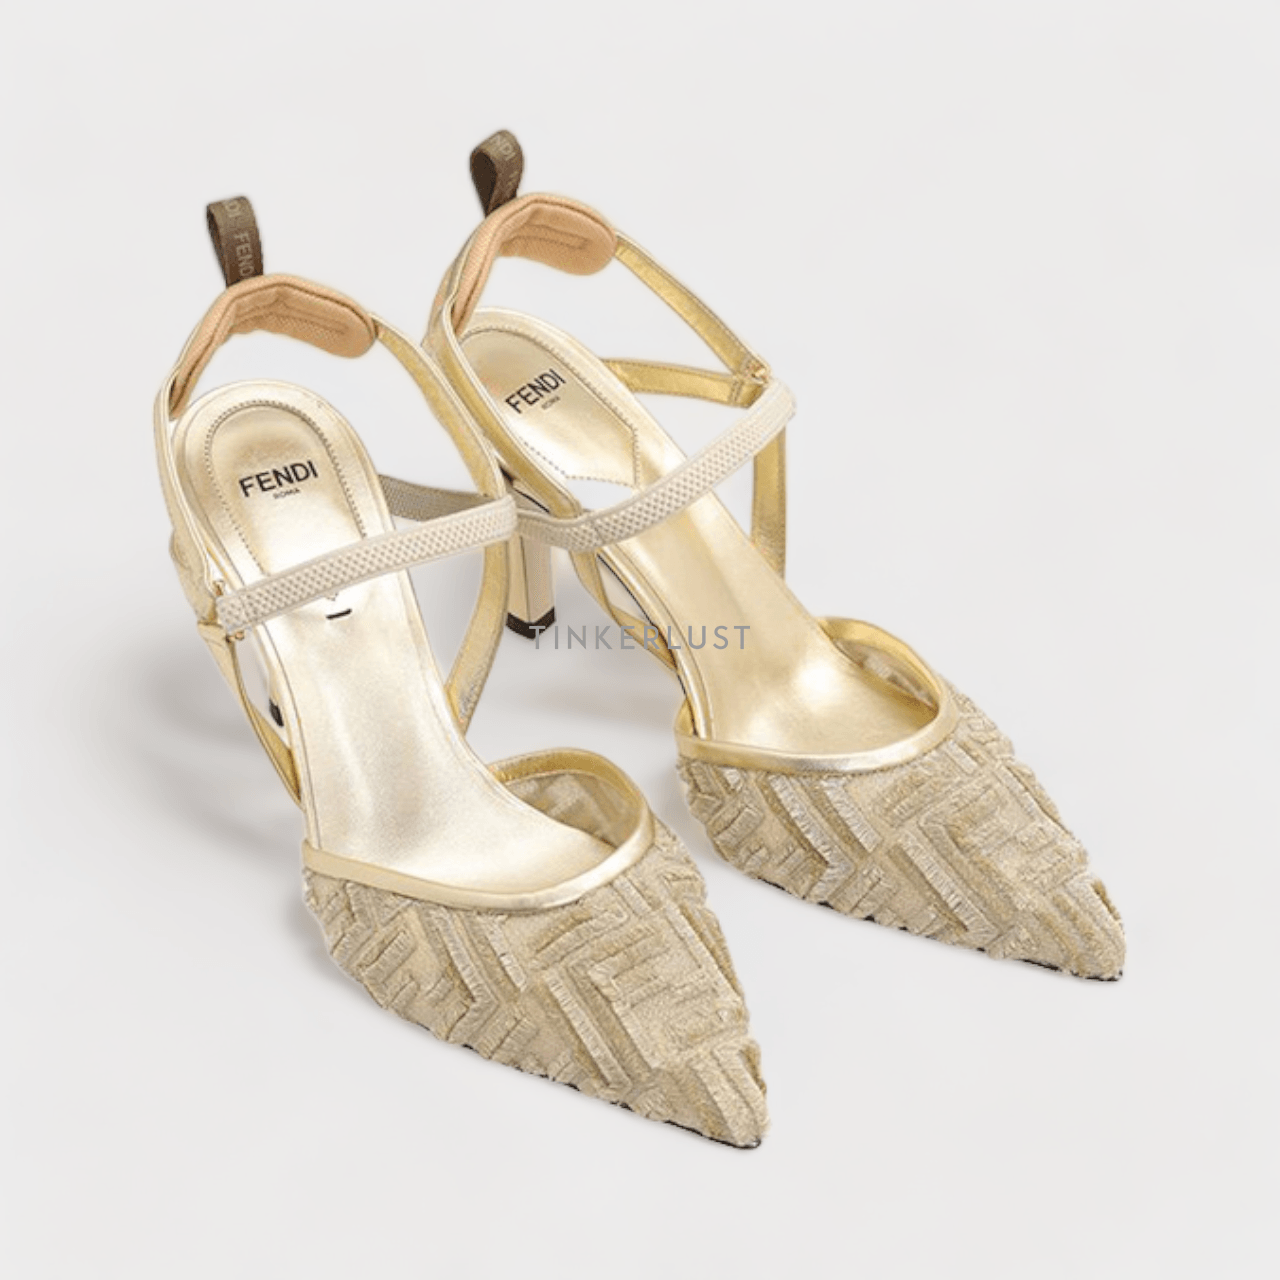 Fendi Women Colibri Lite Slingback Pumps 85mm in Gold Micro Mesh with Fringed FF Pattern	